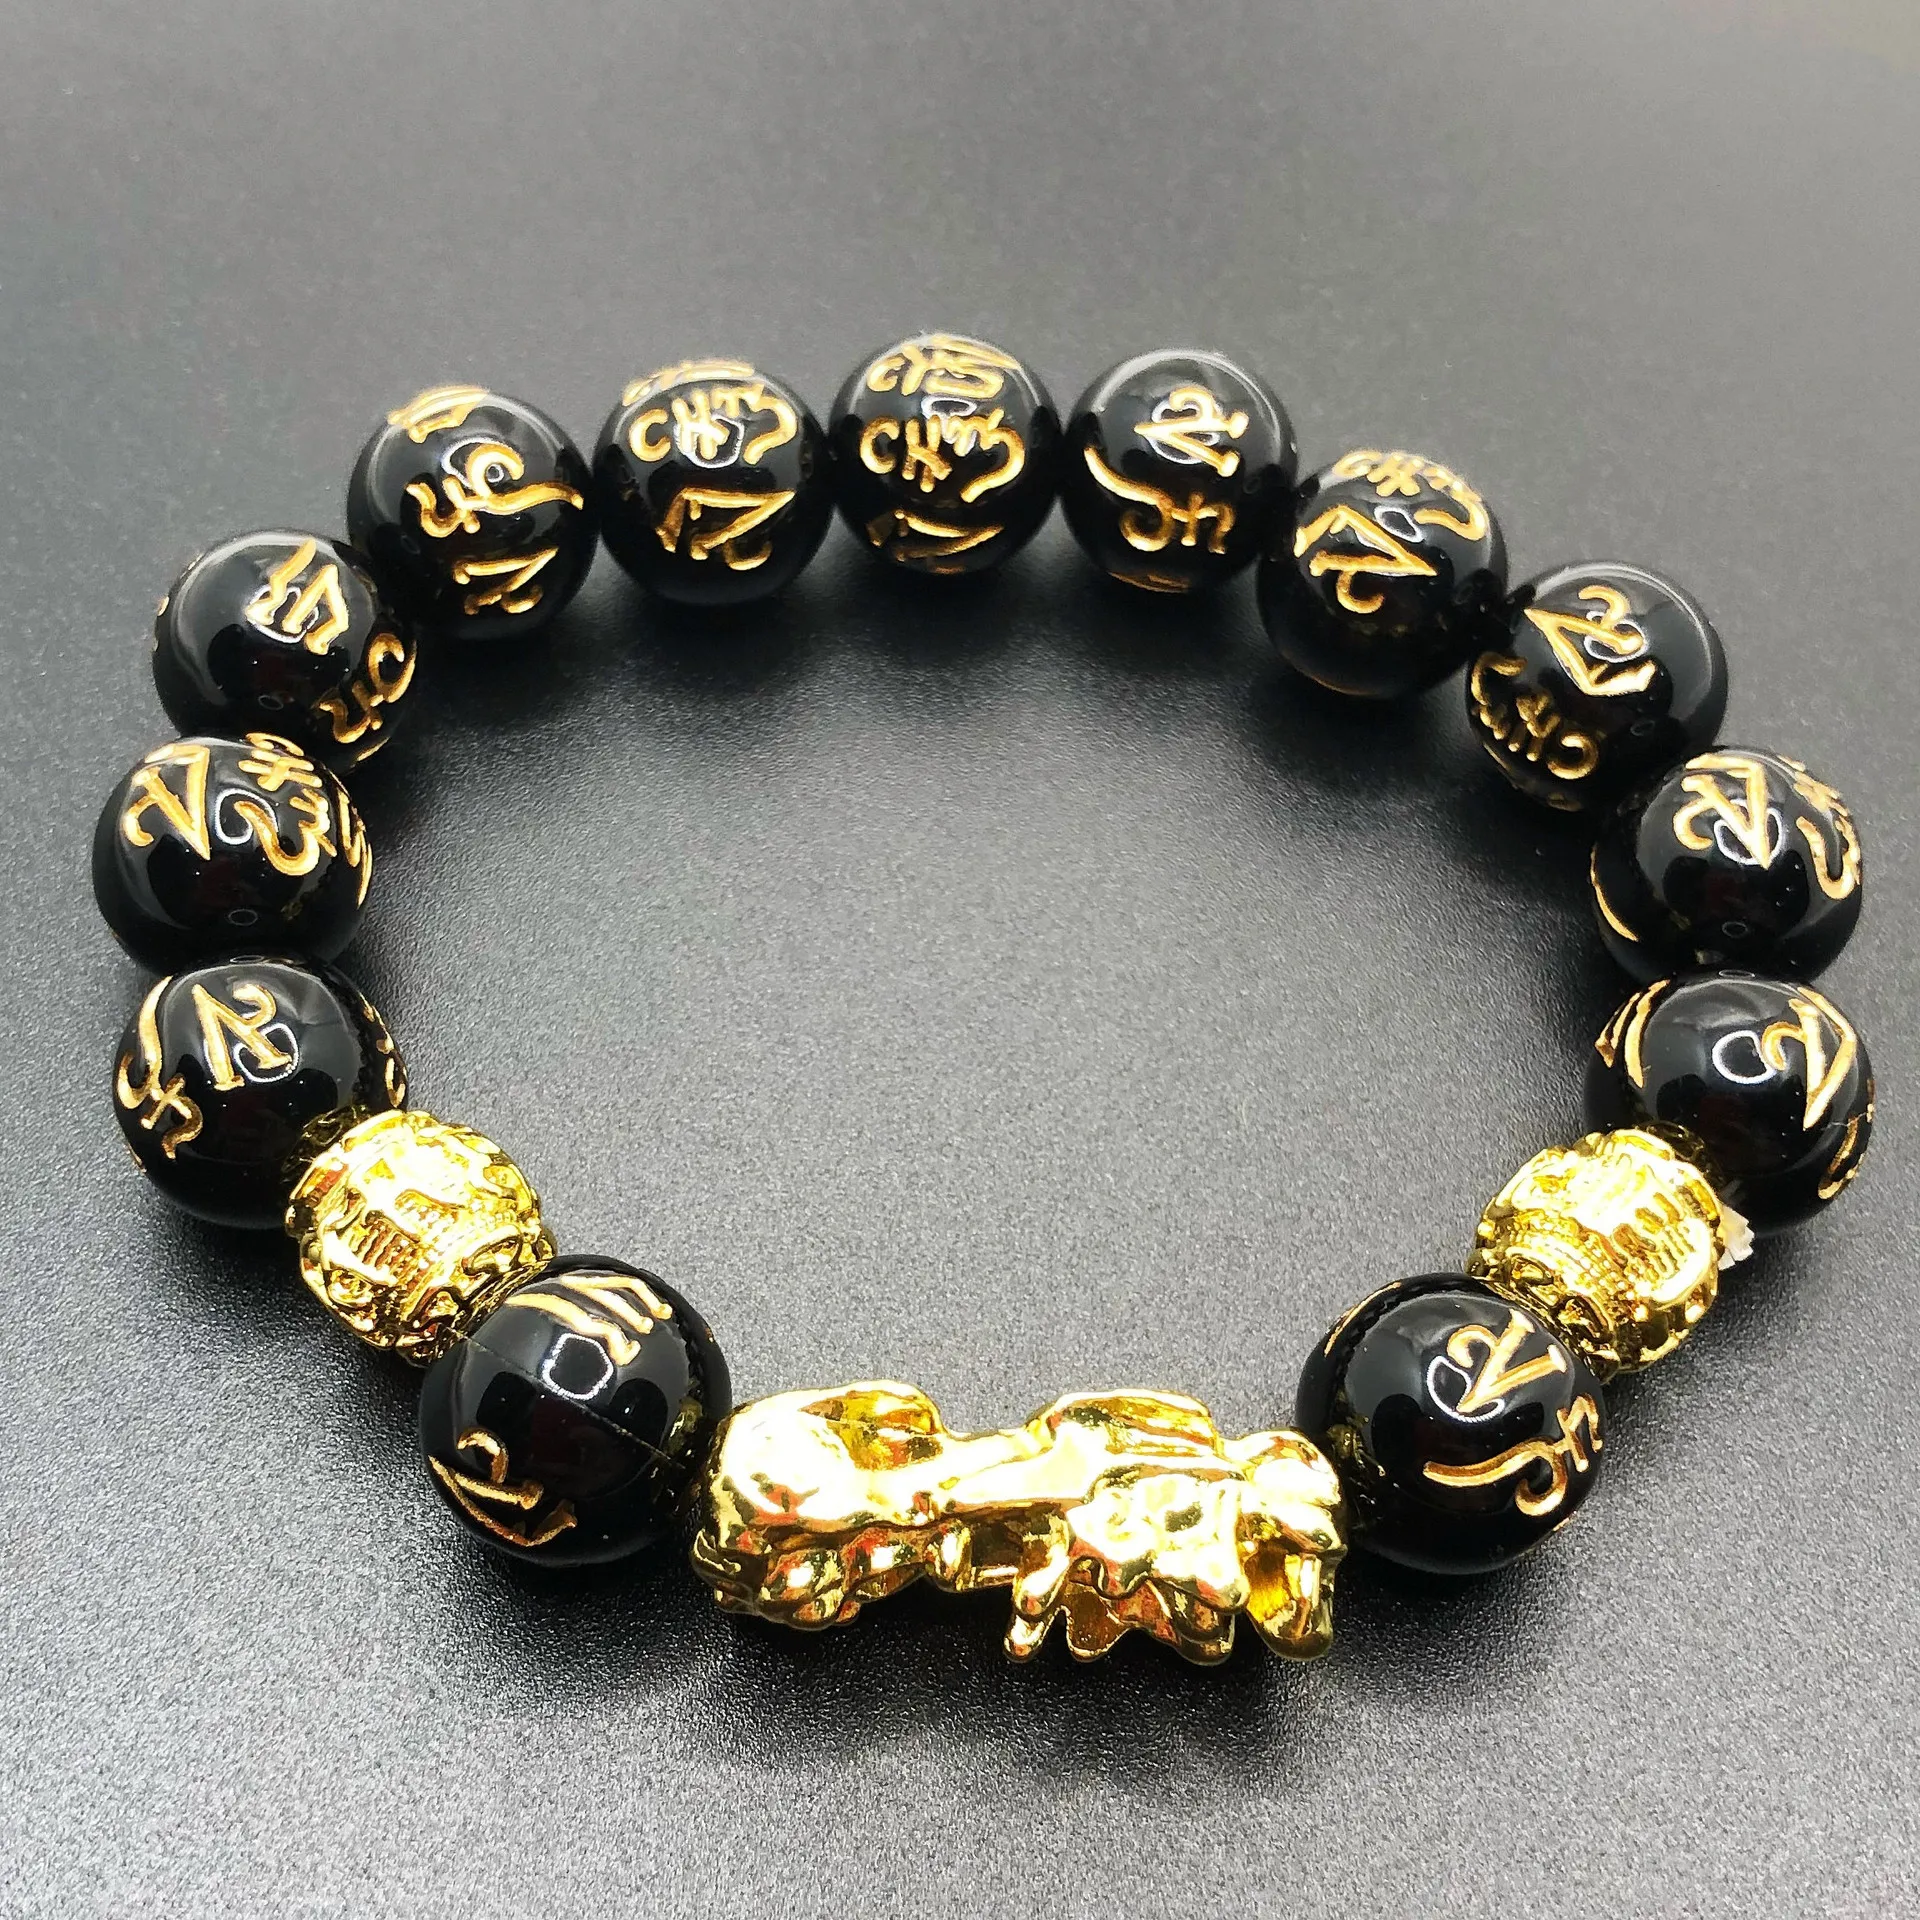 

Brave Troops Obsidian Beads Bracelet Feng Shui Wealth and Good Luck Wristband for Women Men Unisex Fashion Jewelry Accessories